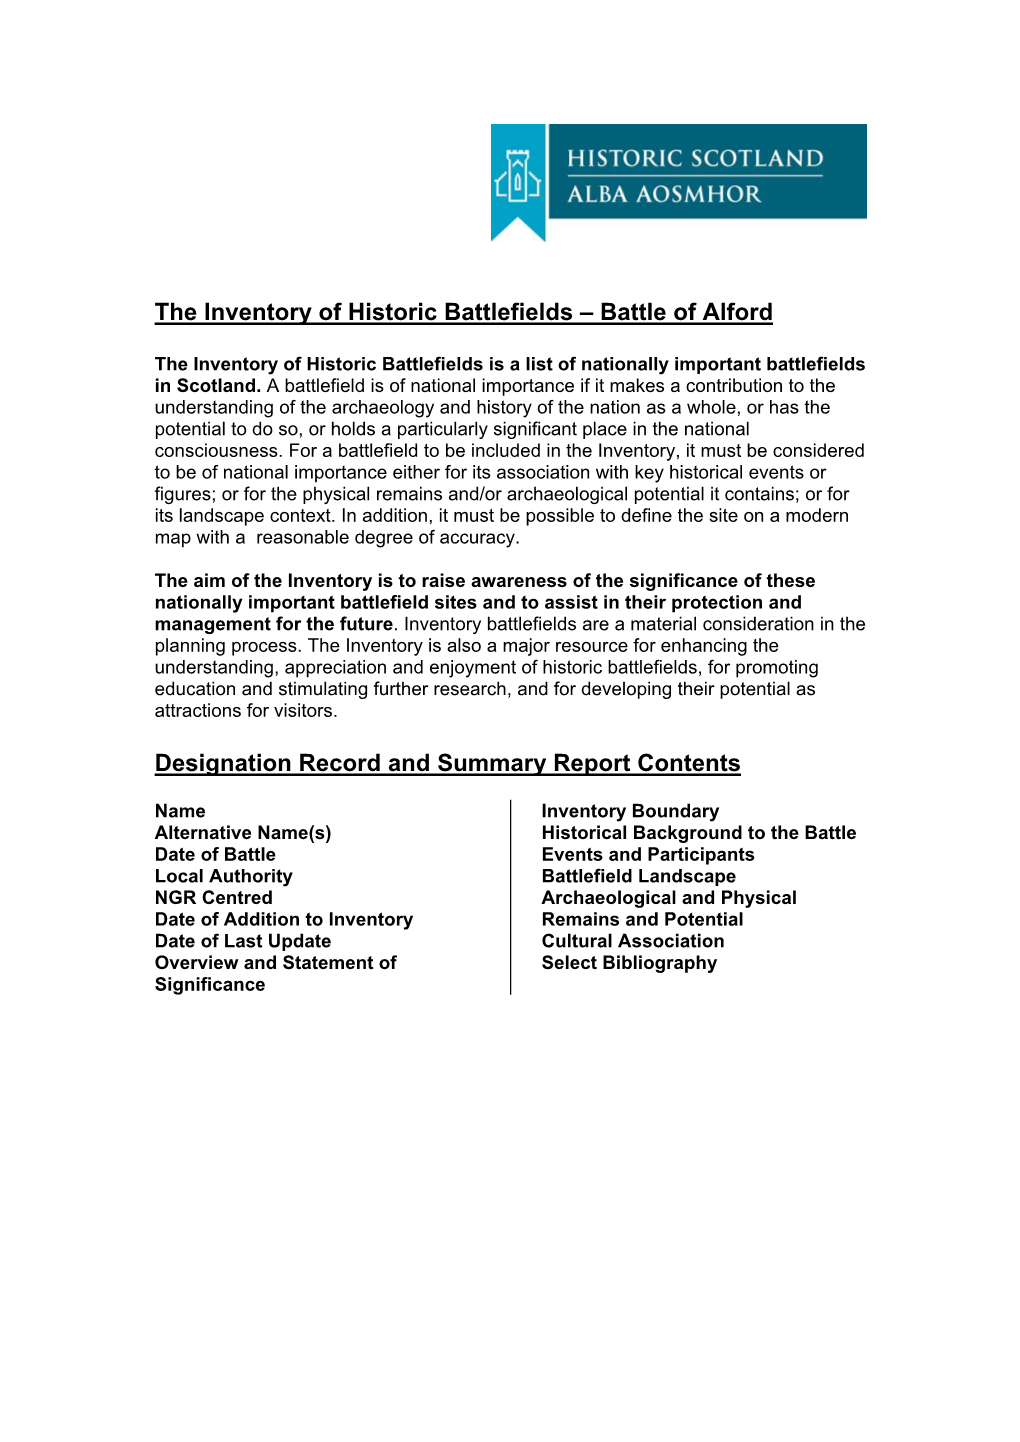 The Inventory of Historic Battlefields – Battle of Alford Designation Record